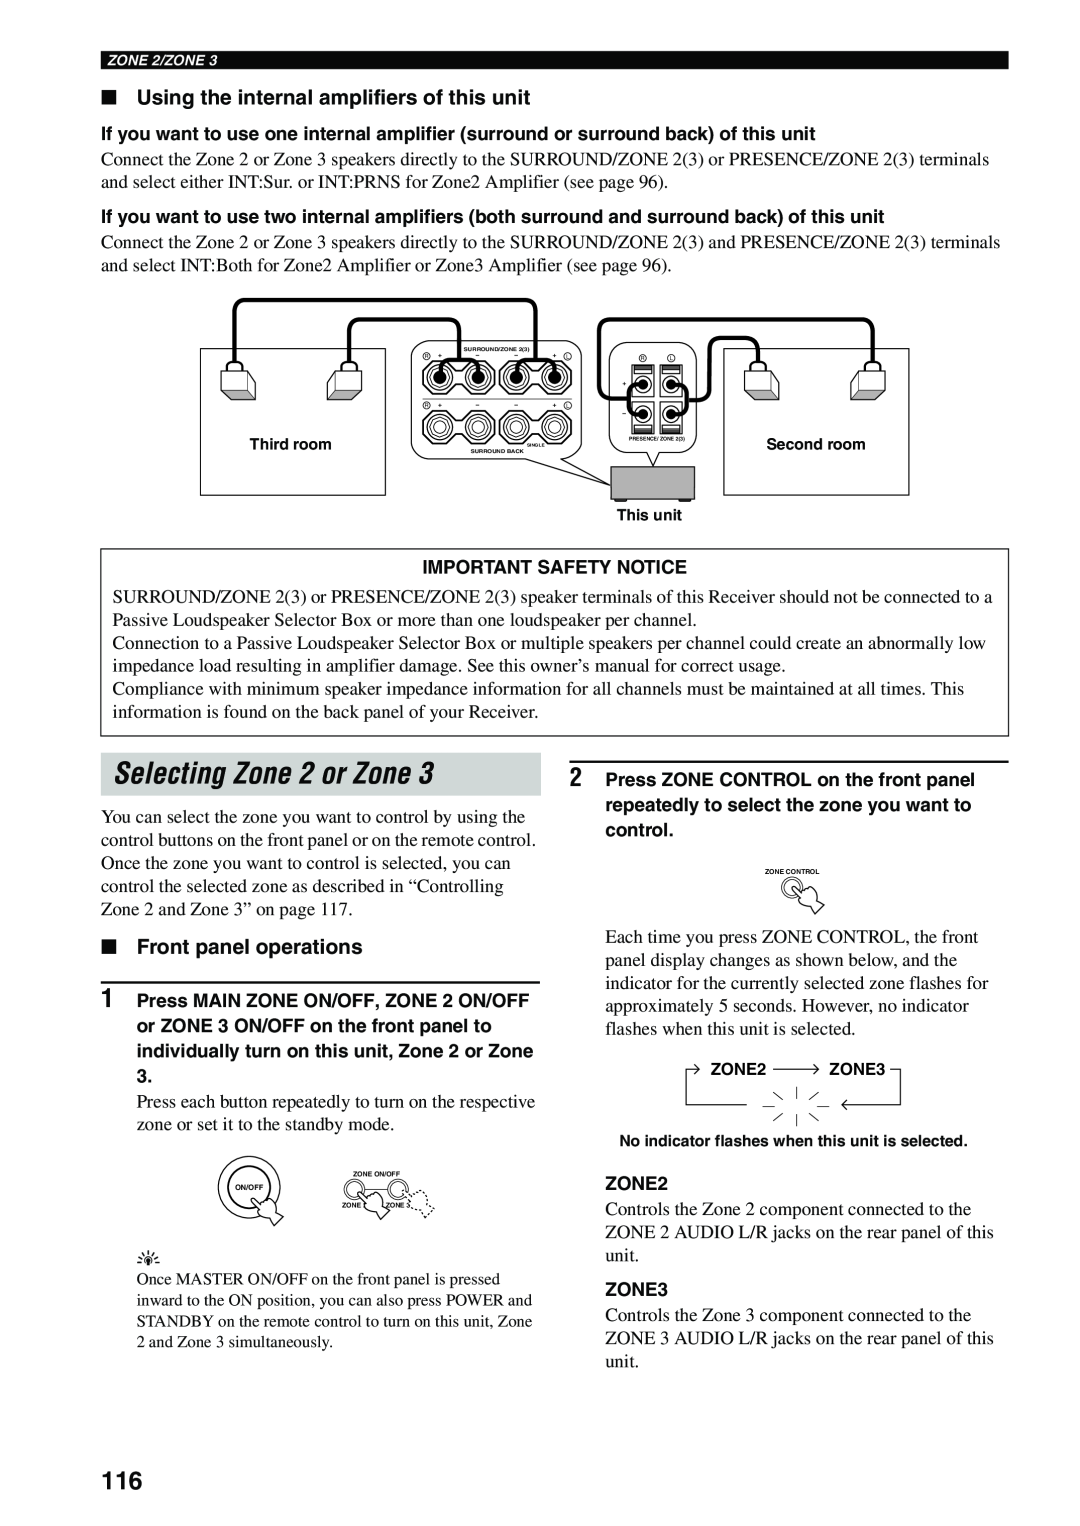 Yamaha X-V2600 owner manual Selecting Zone 2 or Zone, Using the internal amplifiers of this unit, Front panel operations 